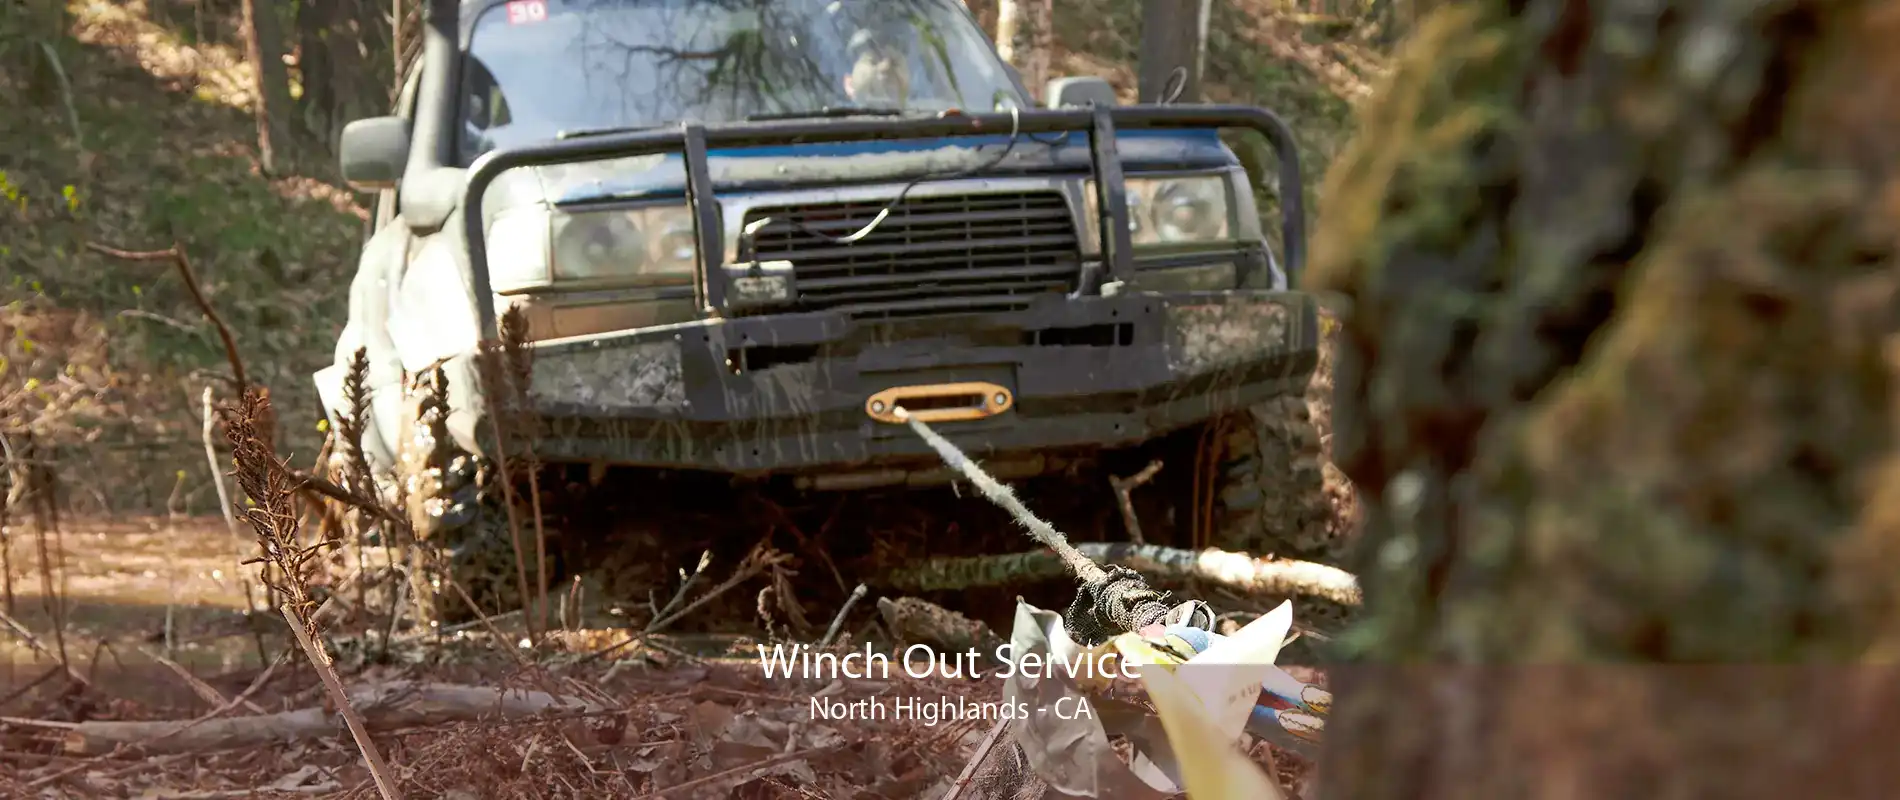 Winch Out Service North Highlands - CA